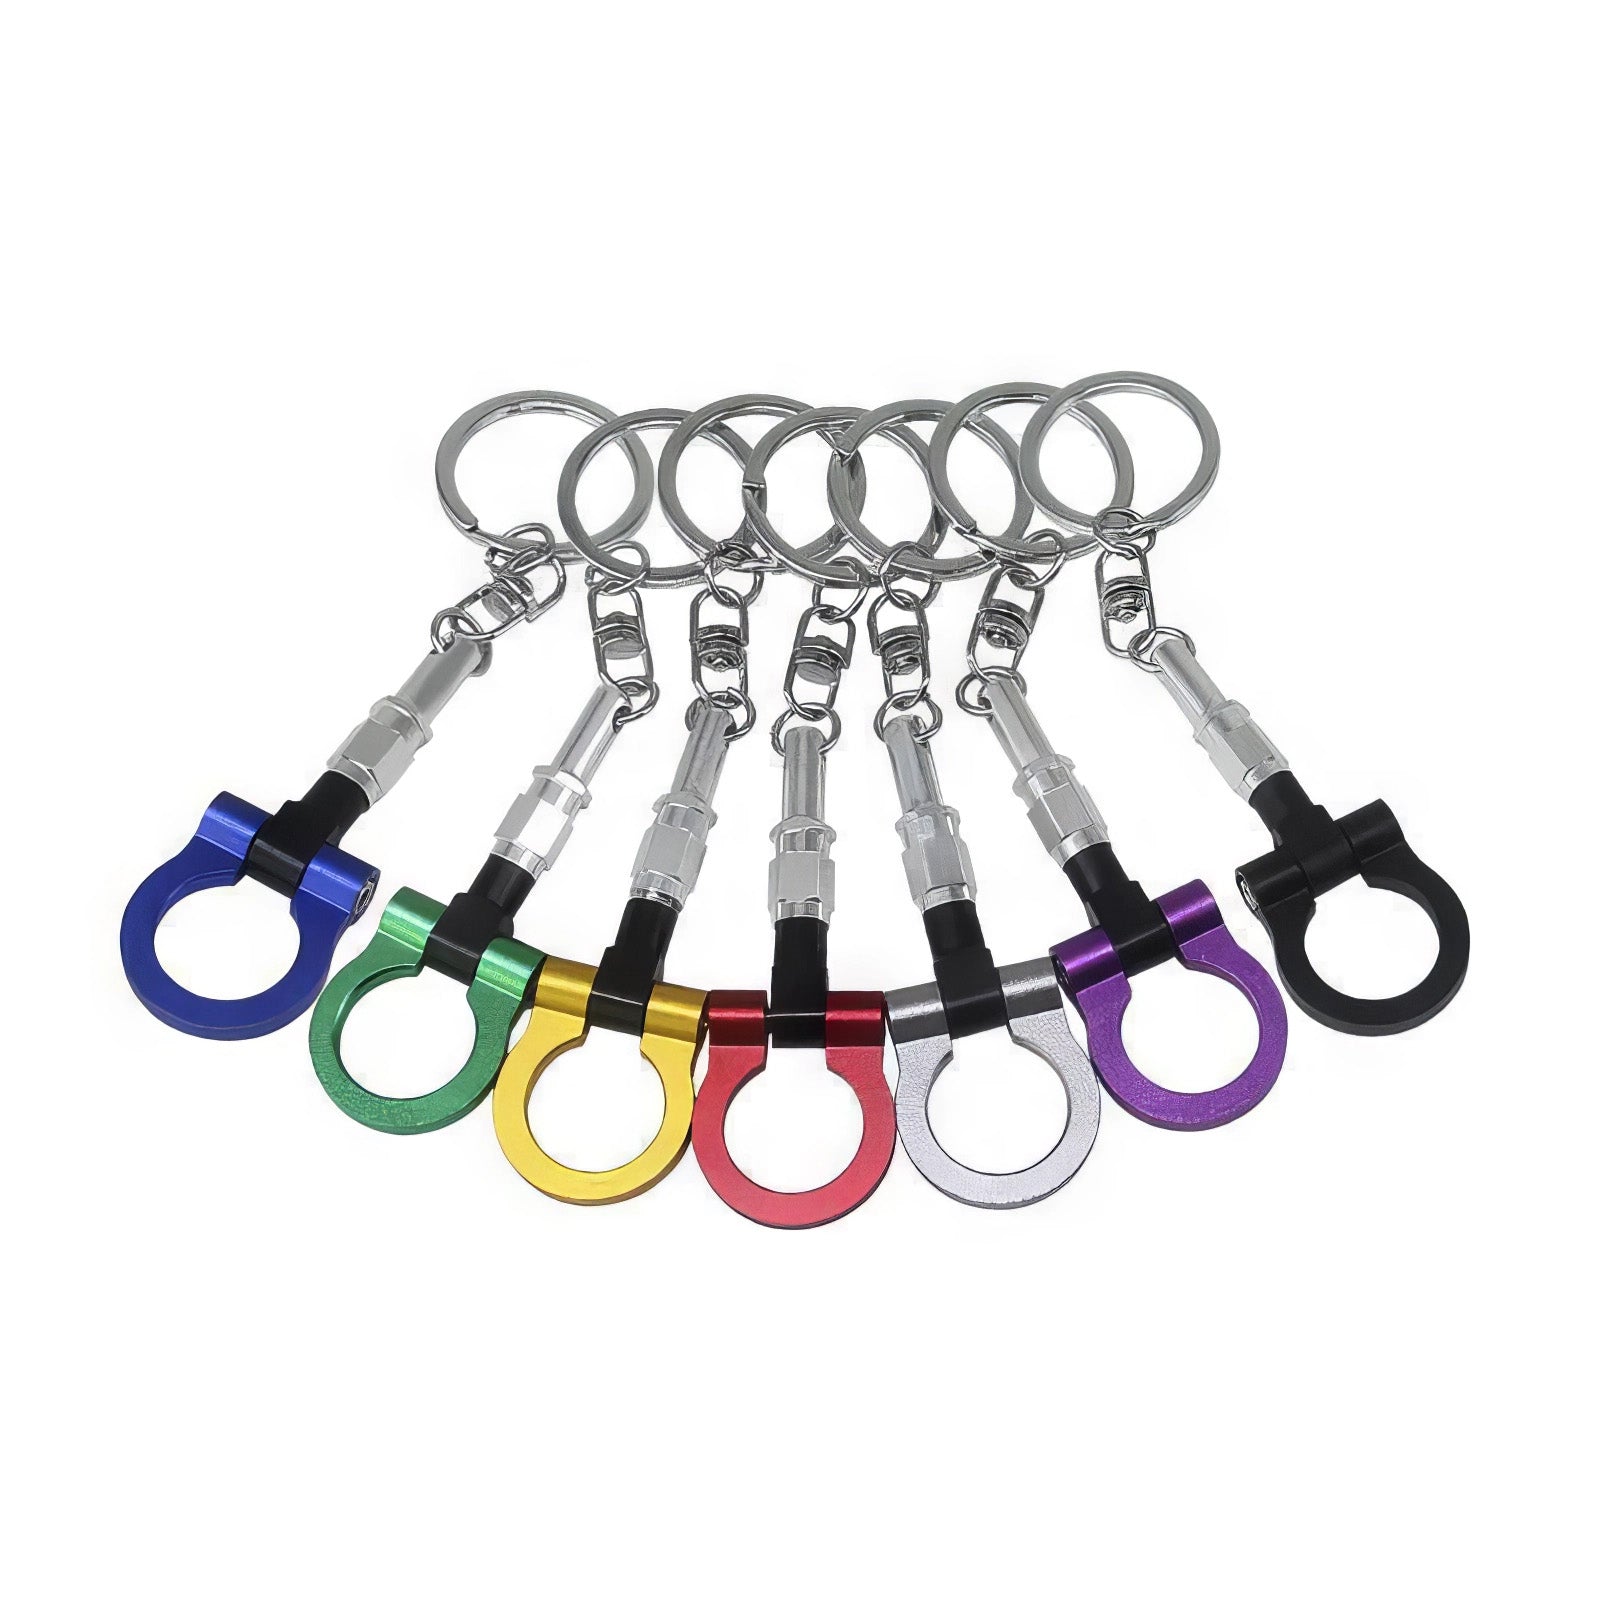 Tow hook keychains in all color variants: blue, green, gold, red, silver, purple, and black.